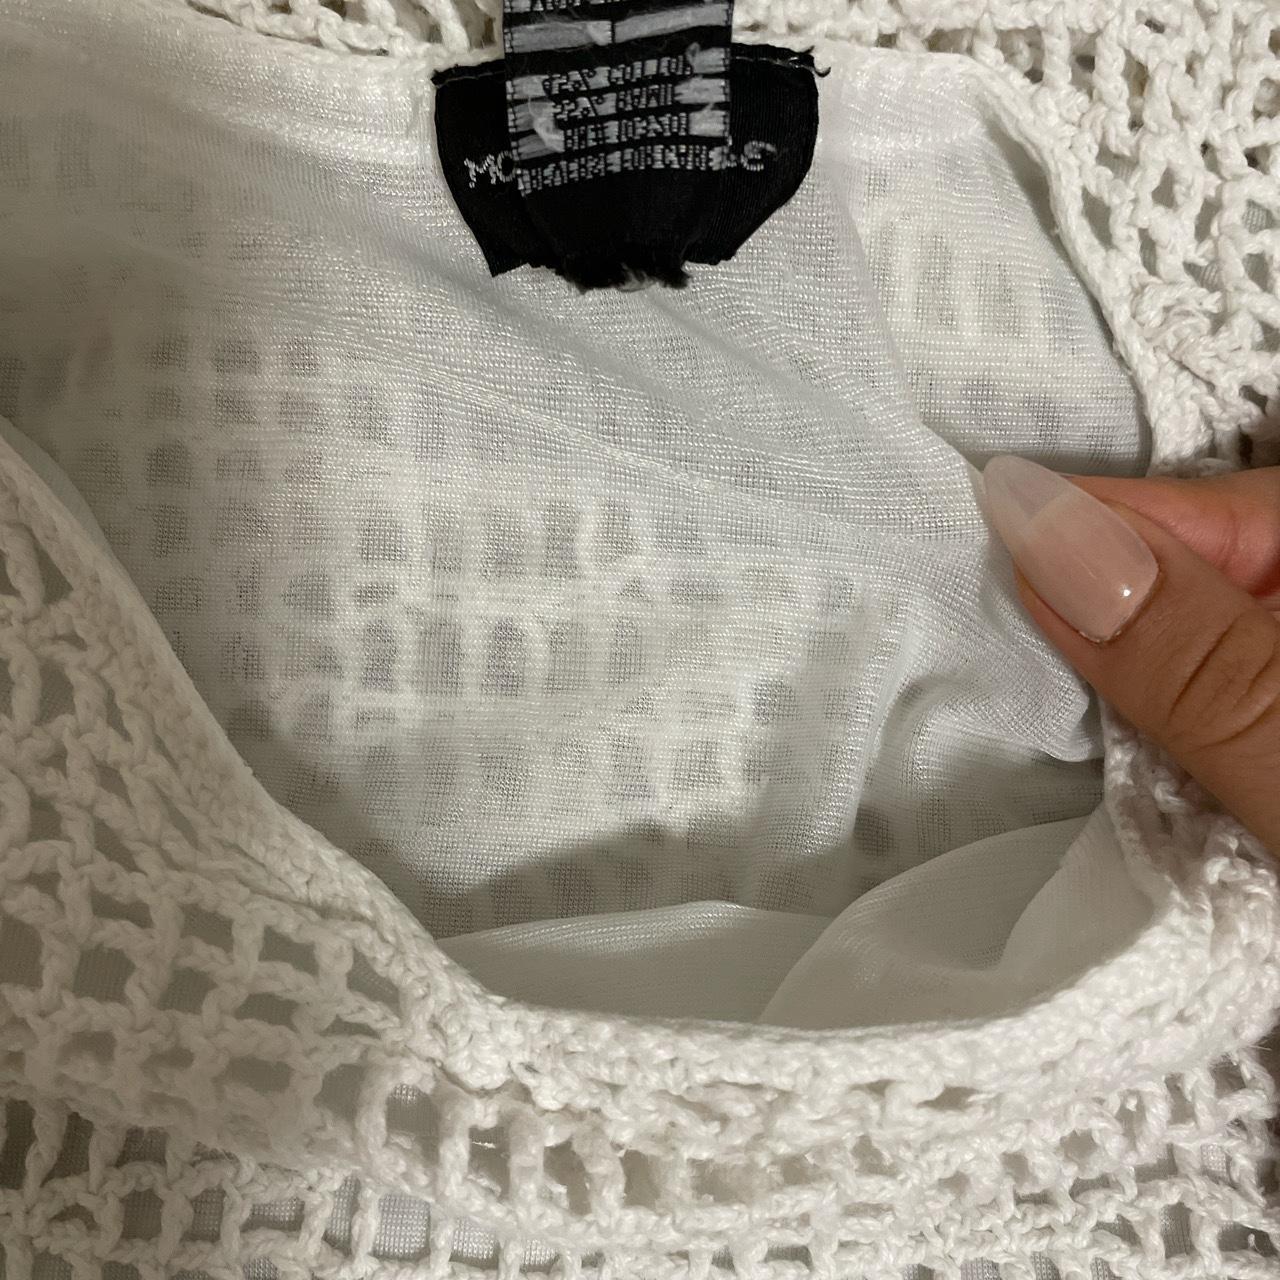 Product Image 4 - White Knit Top

It has two